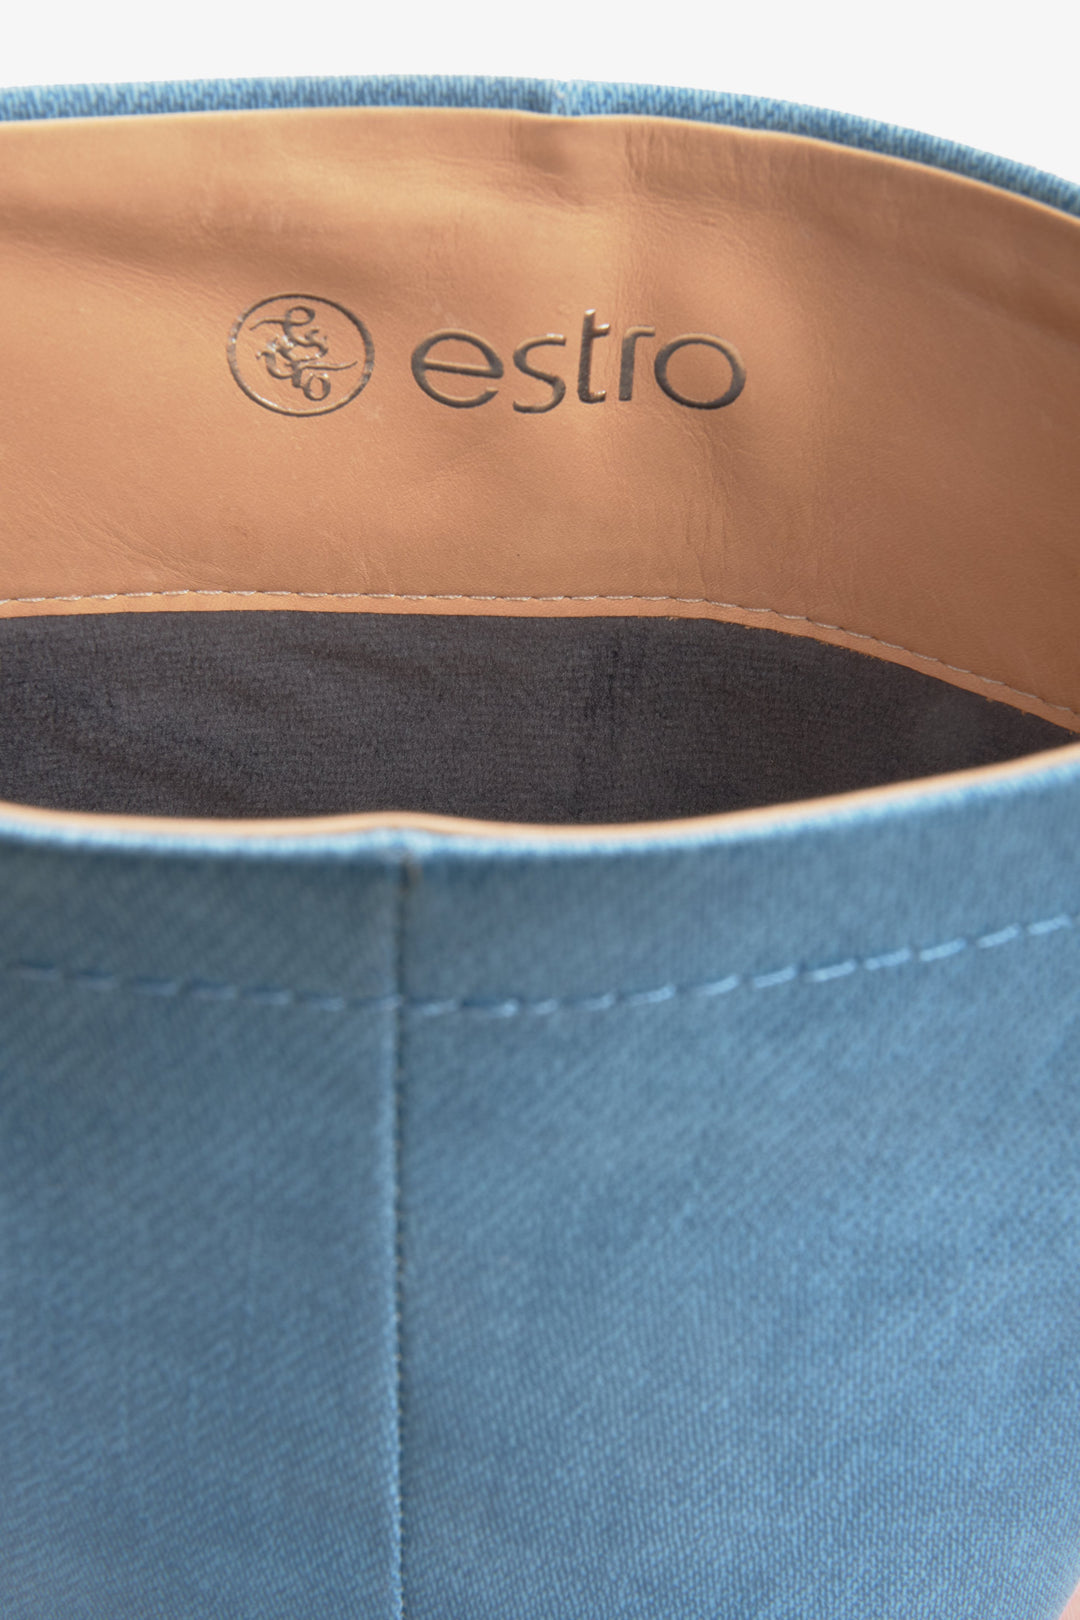 Estro women's boots in blue with a wide shaft - close-up on detail.